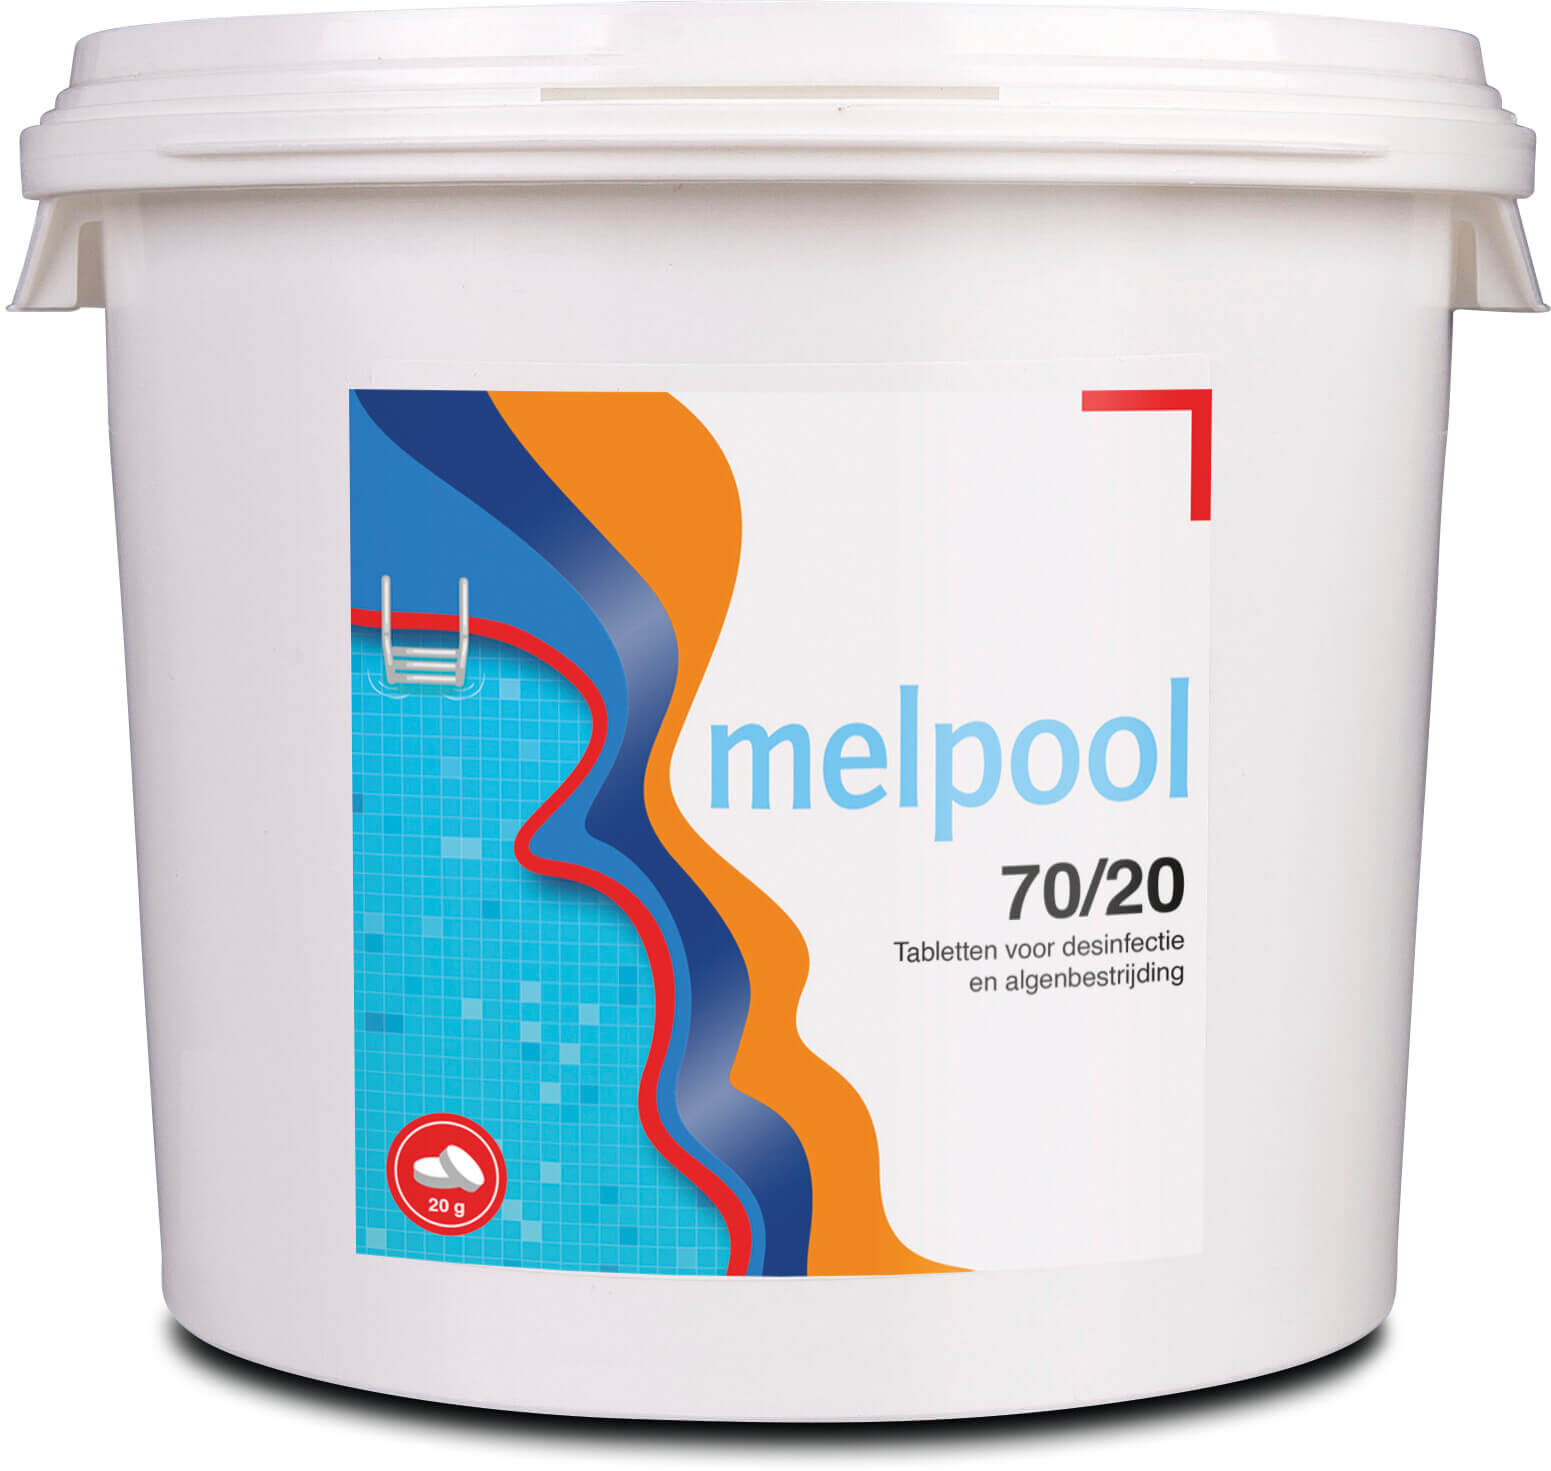 Melpool 70/20 calciumhypochlorit hydreret tabletter 70% 5000g type 20g tablet